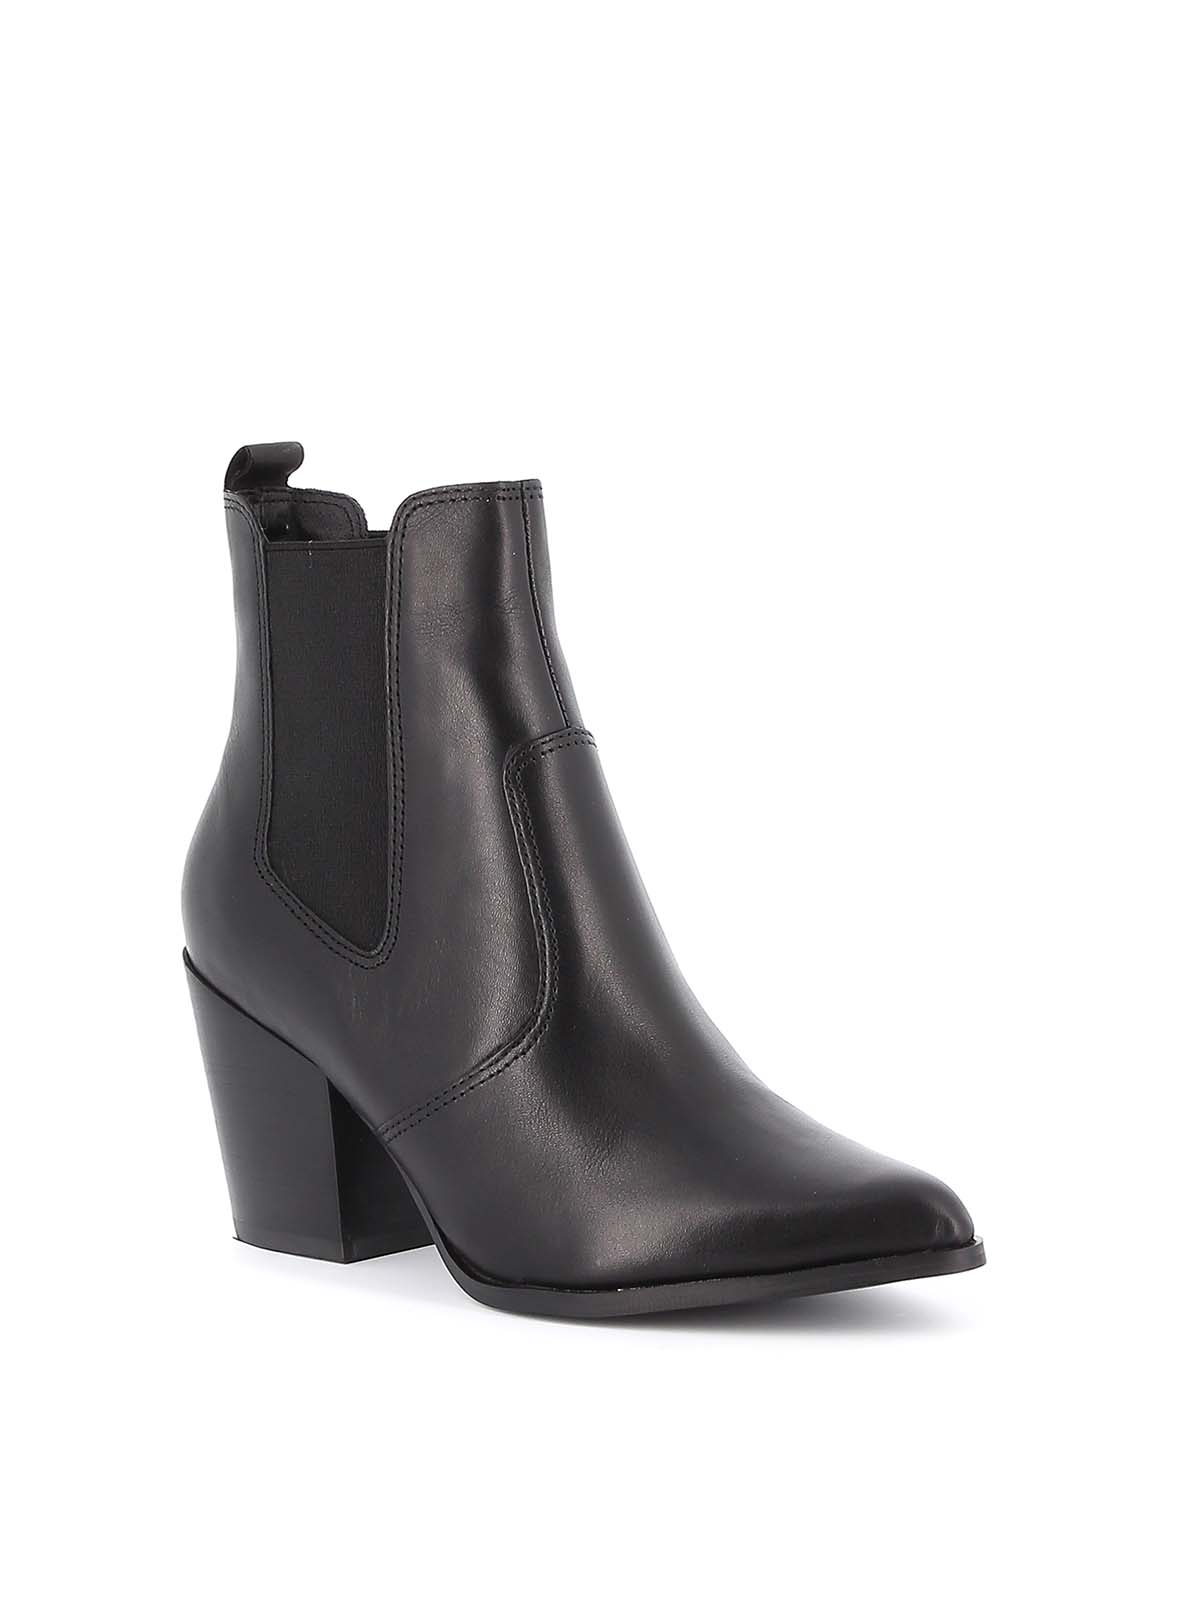 Patricia black leather ankle boots 